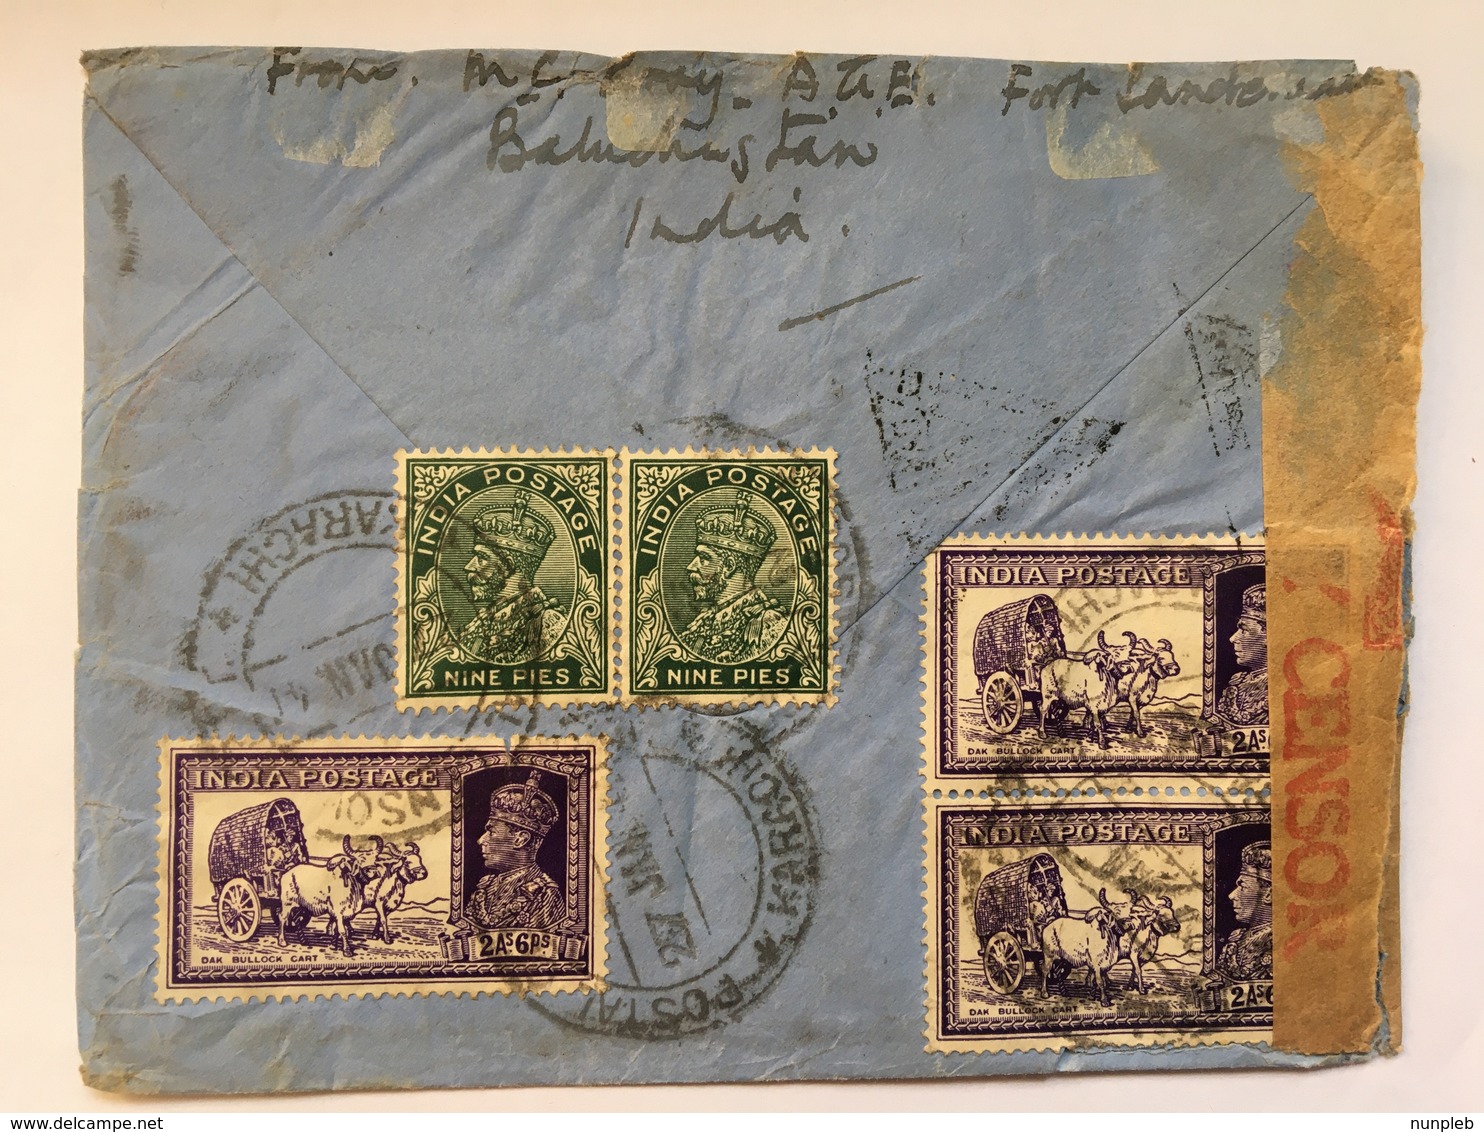 INDIA George VI 1941 Multi-stamped Cover Front And Rear Air Mail To England With Censor Tape And Marks - 1936-47 King George VI